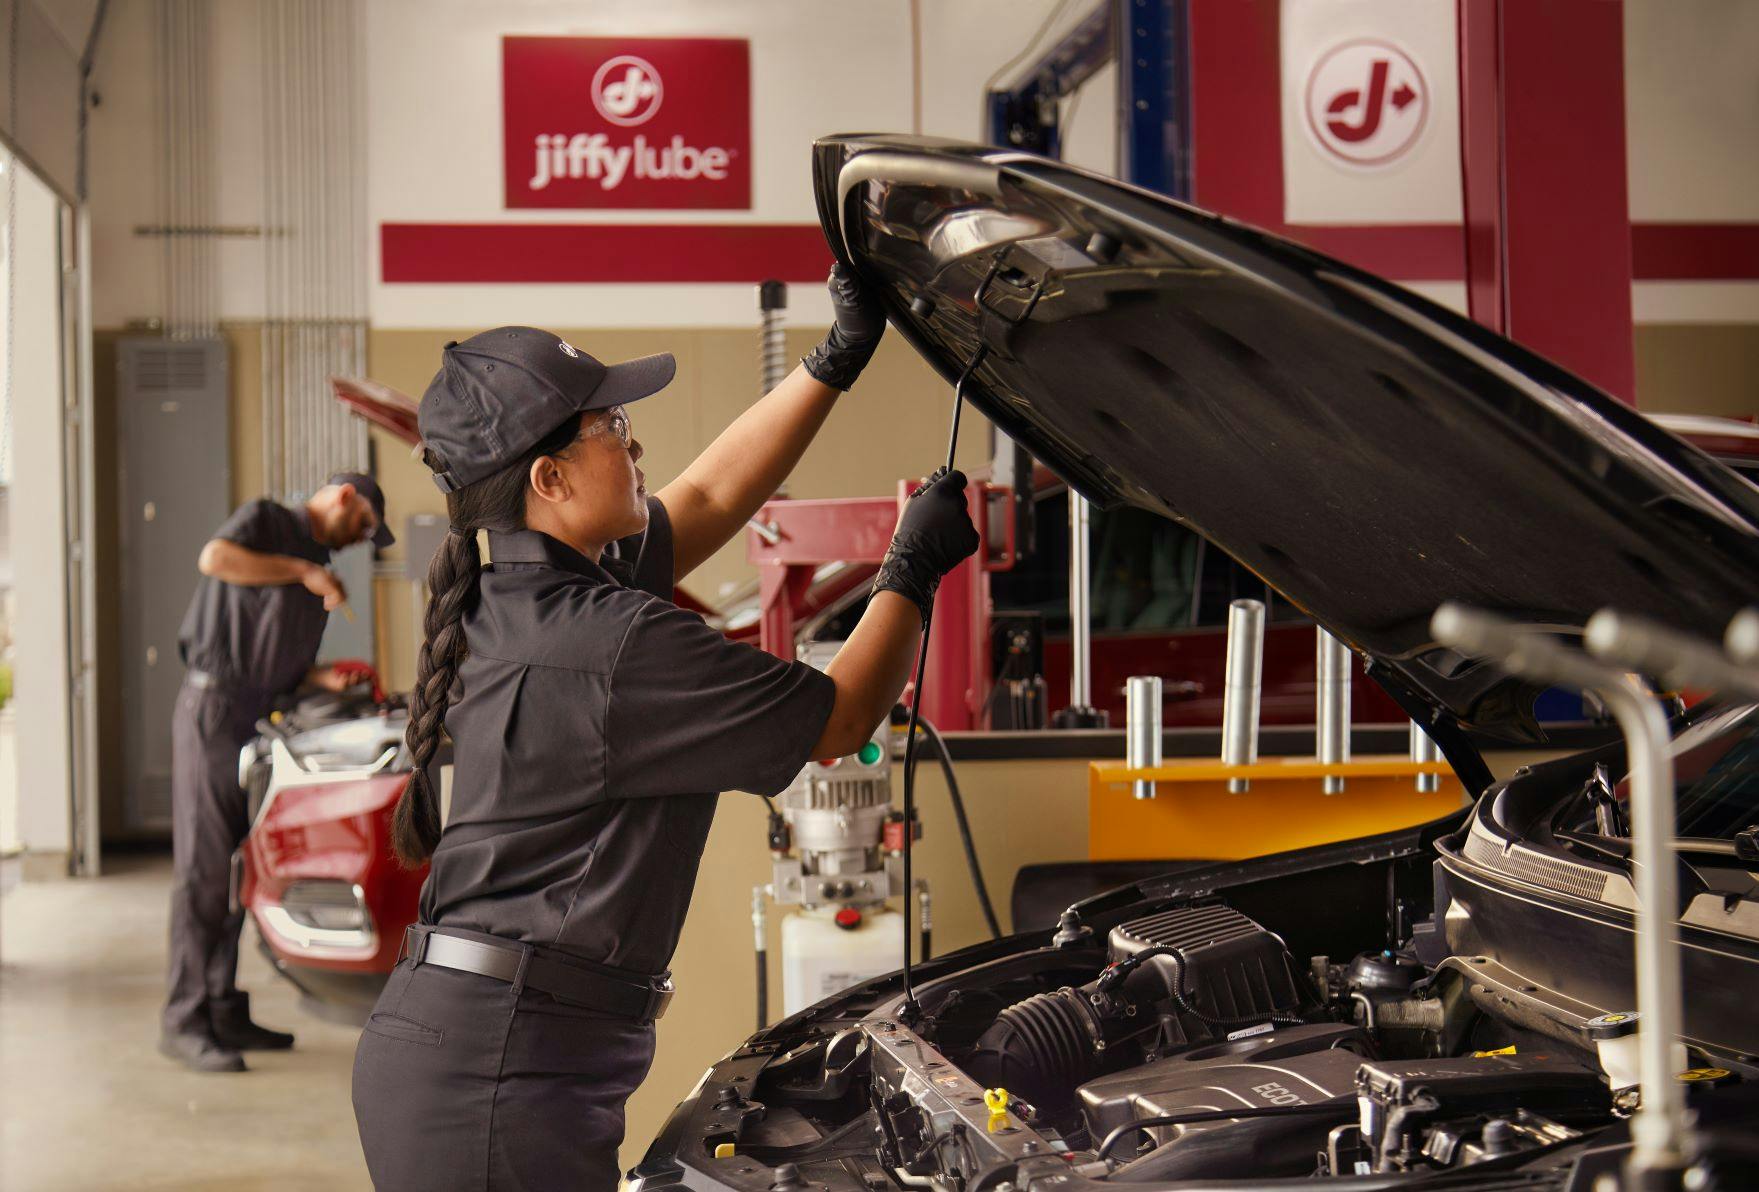 Jiffy Lube service member preparing to provide a service related to a customer's car dashboard warning light, such as the check engine light or change oil light